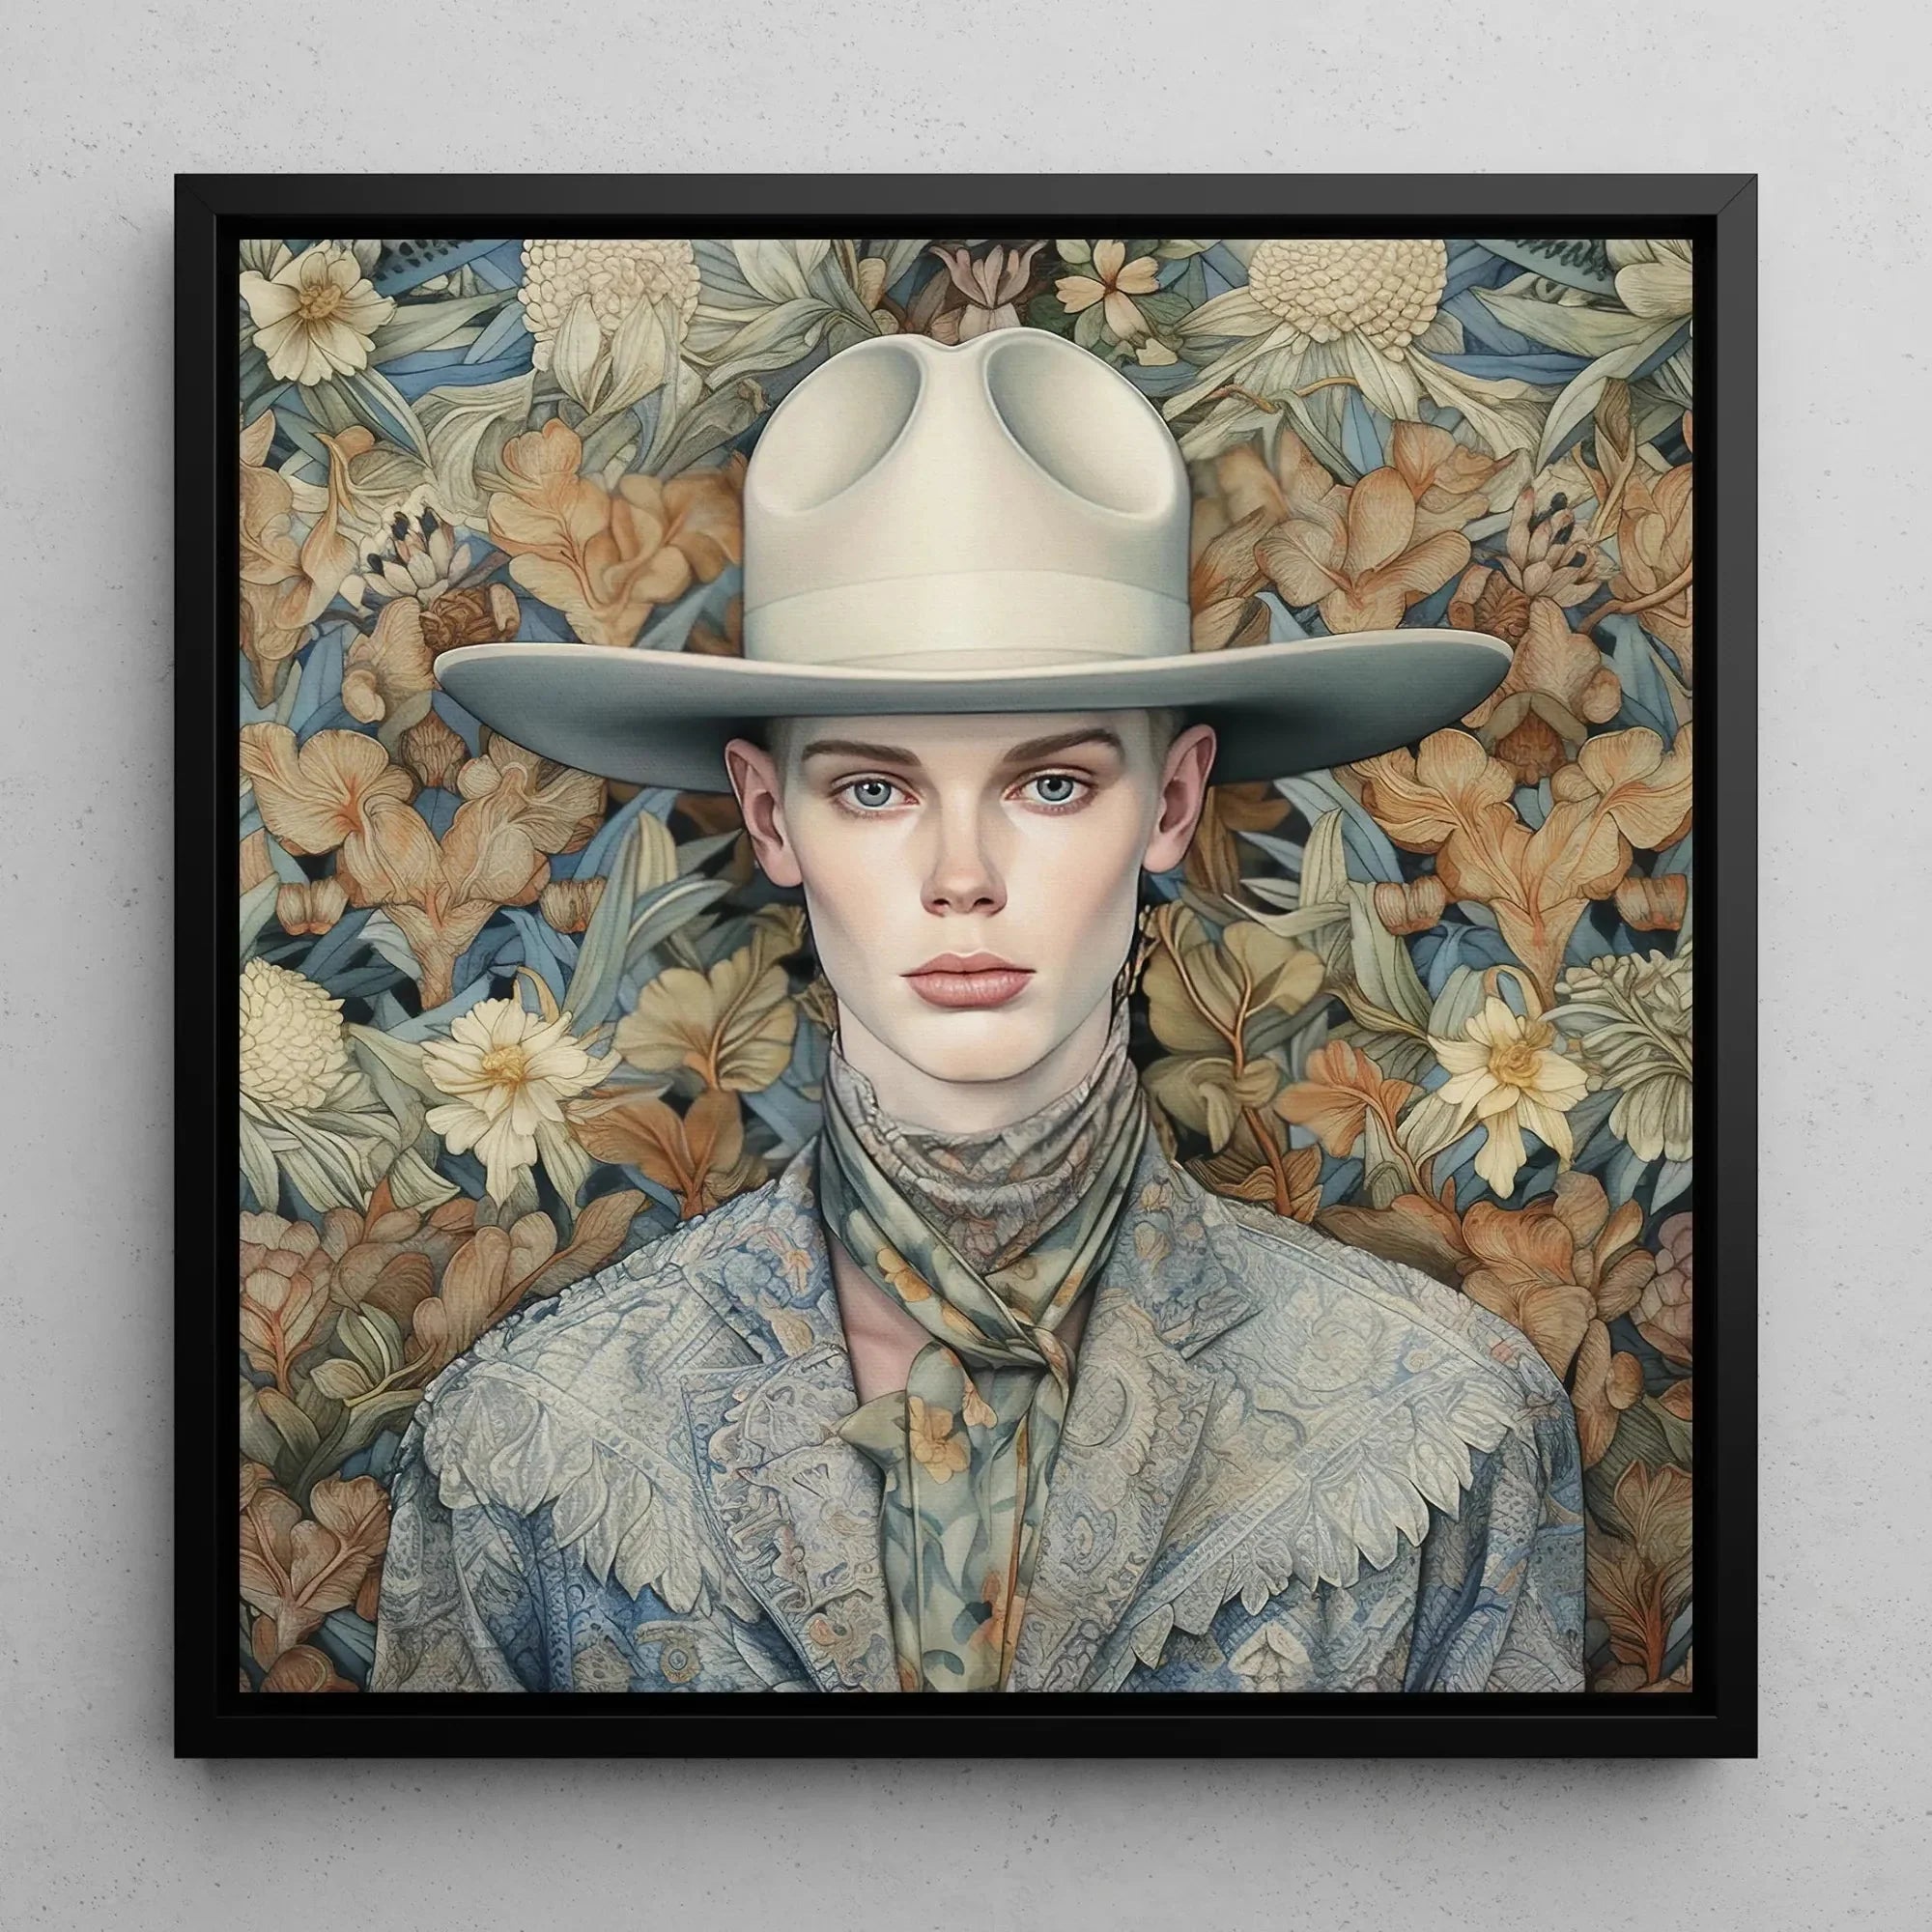 Jasper - Gay Cowboy Framed Canvas - Twink Queerart Outlaw - 16’x16’ - Posters Prints & Visual Artwork - Aesthetic Art